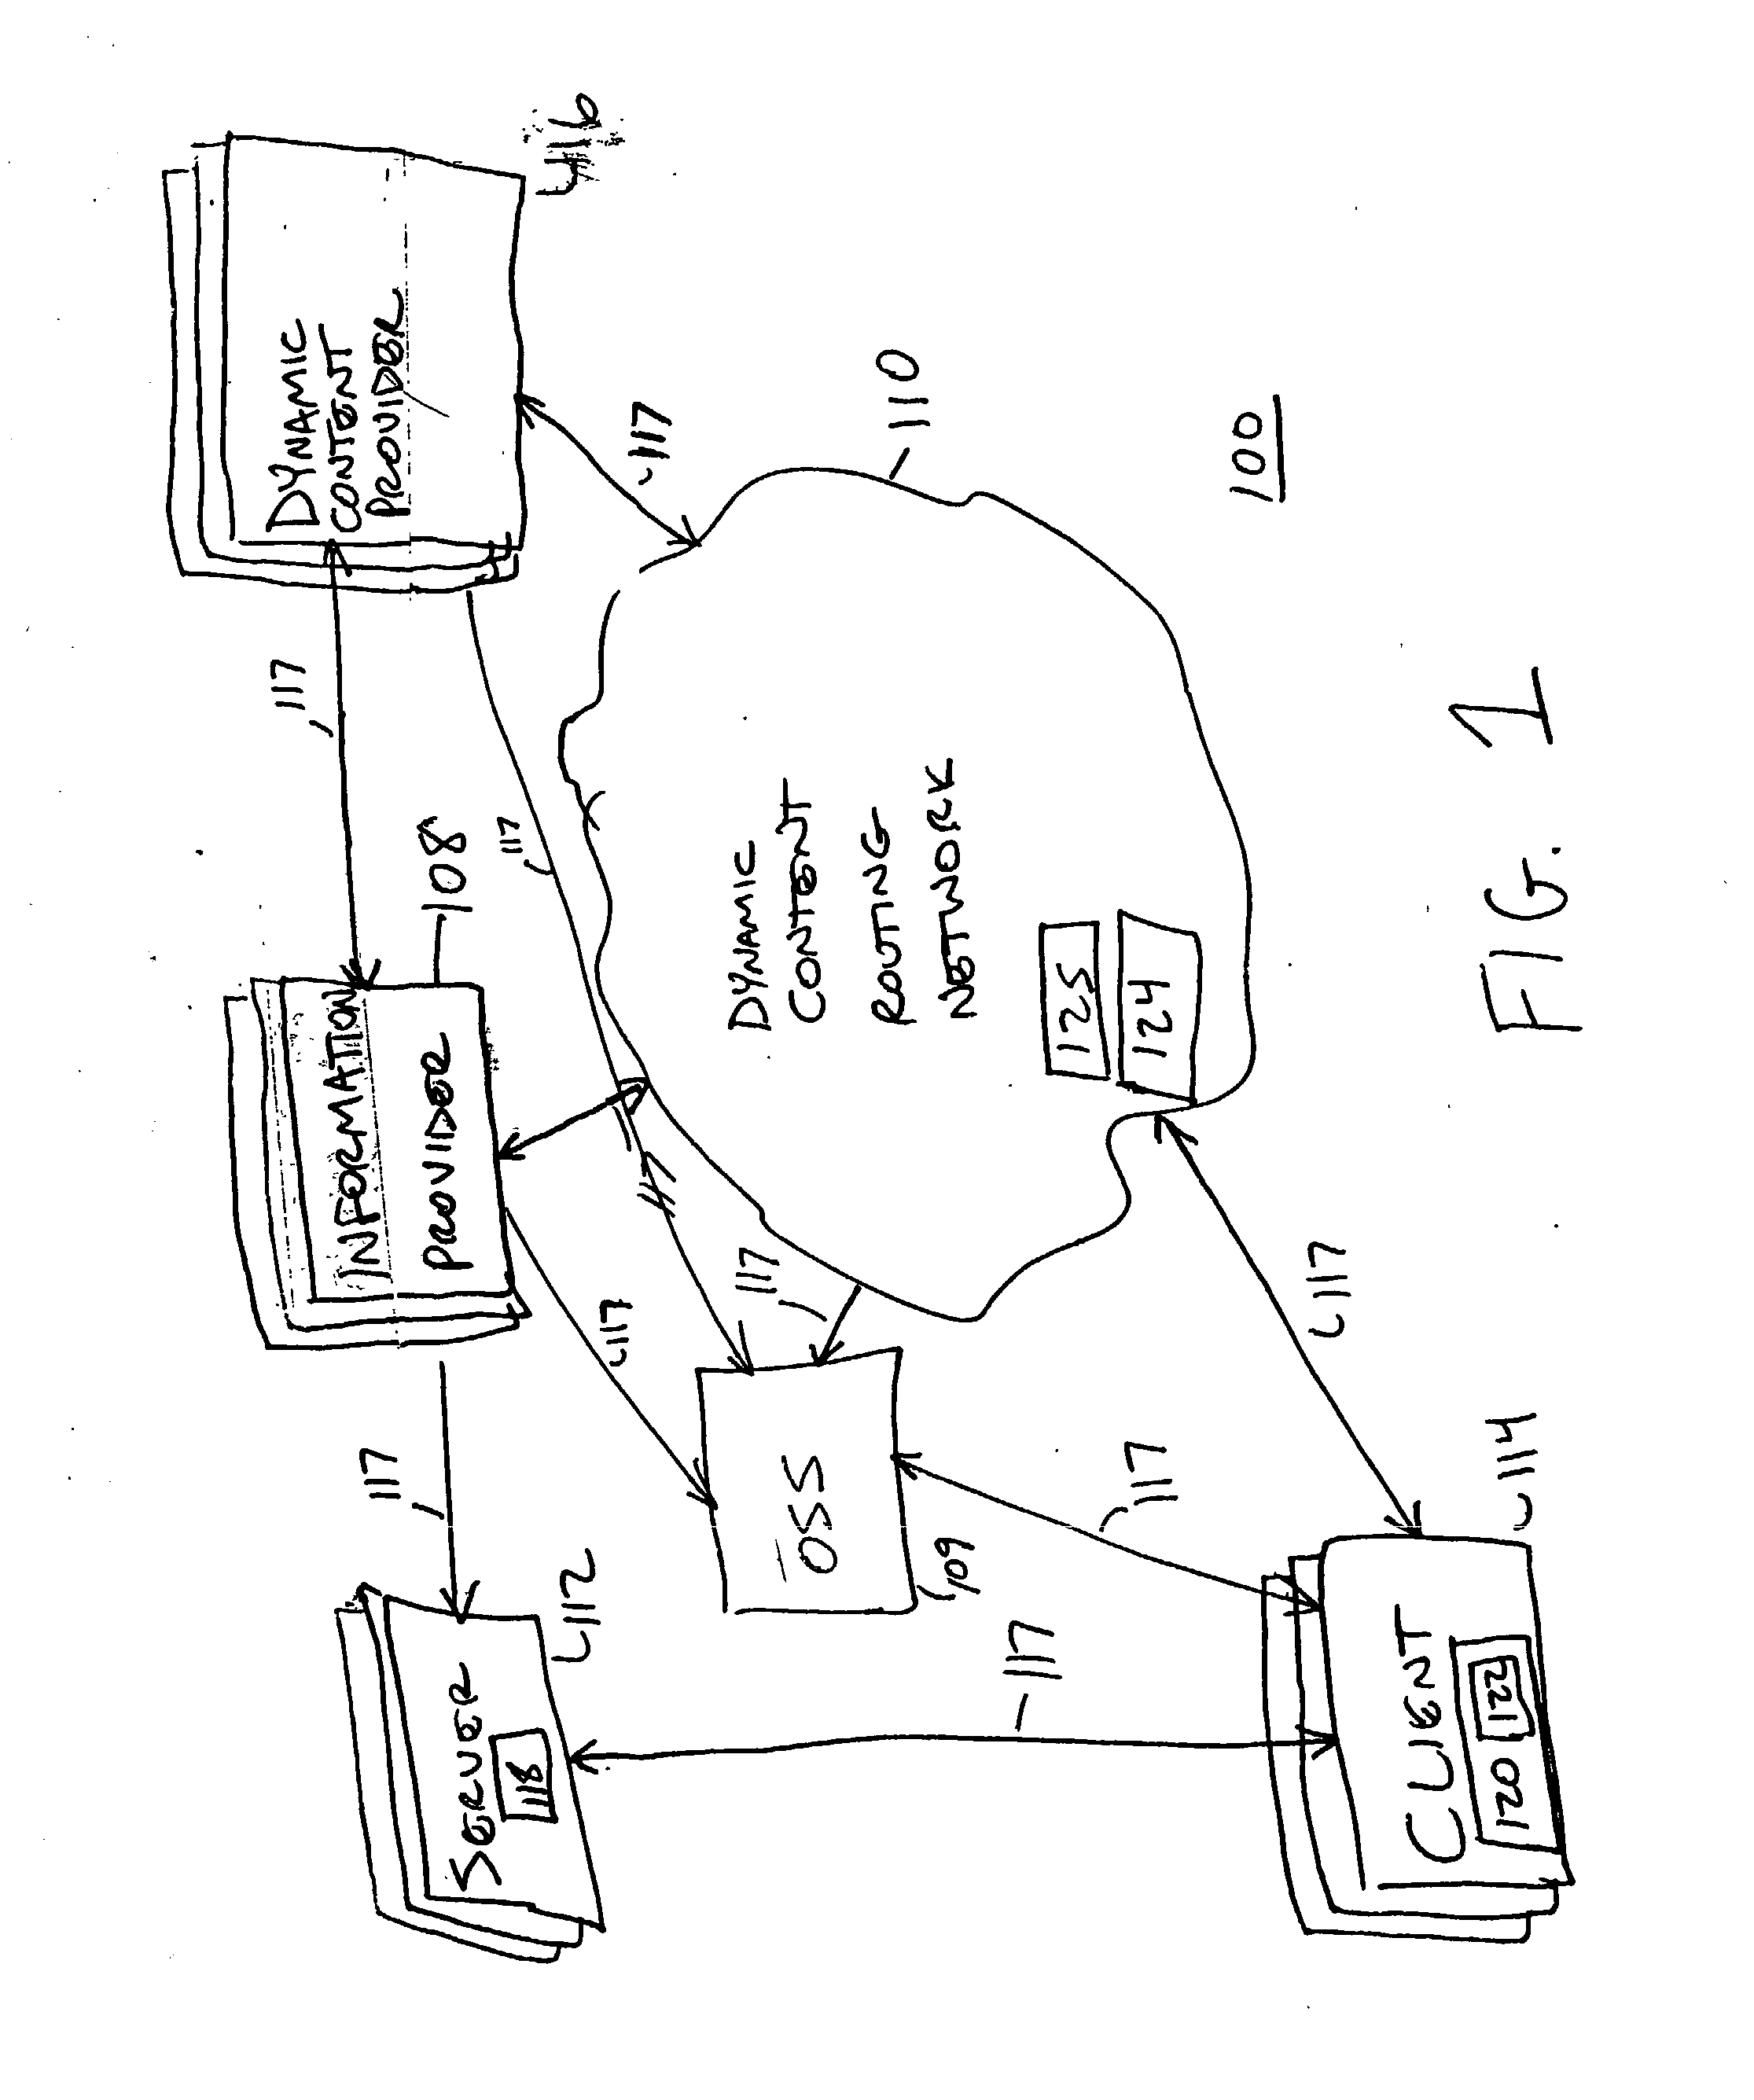 Storing state in a dynamic content routing network